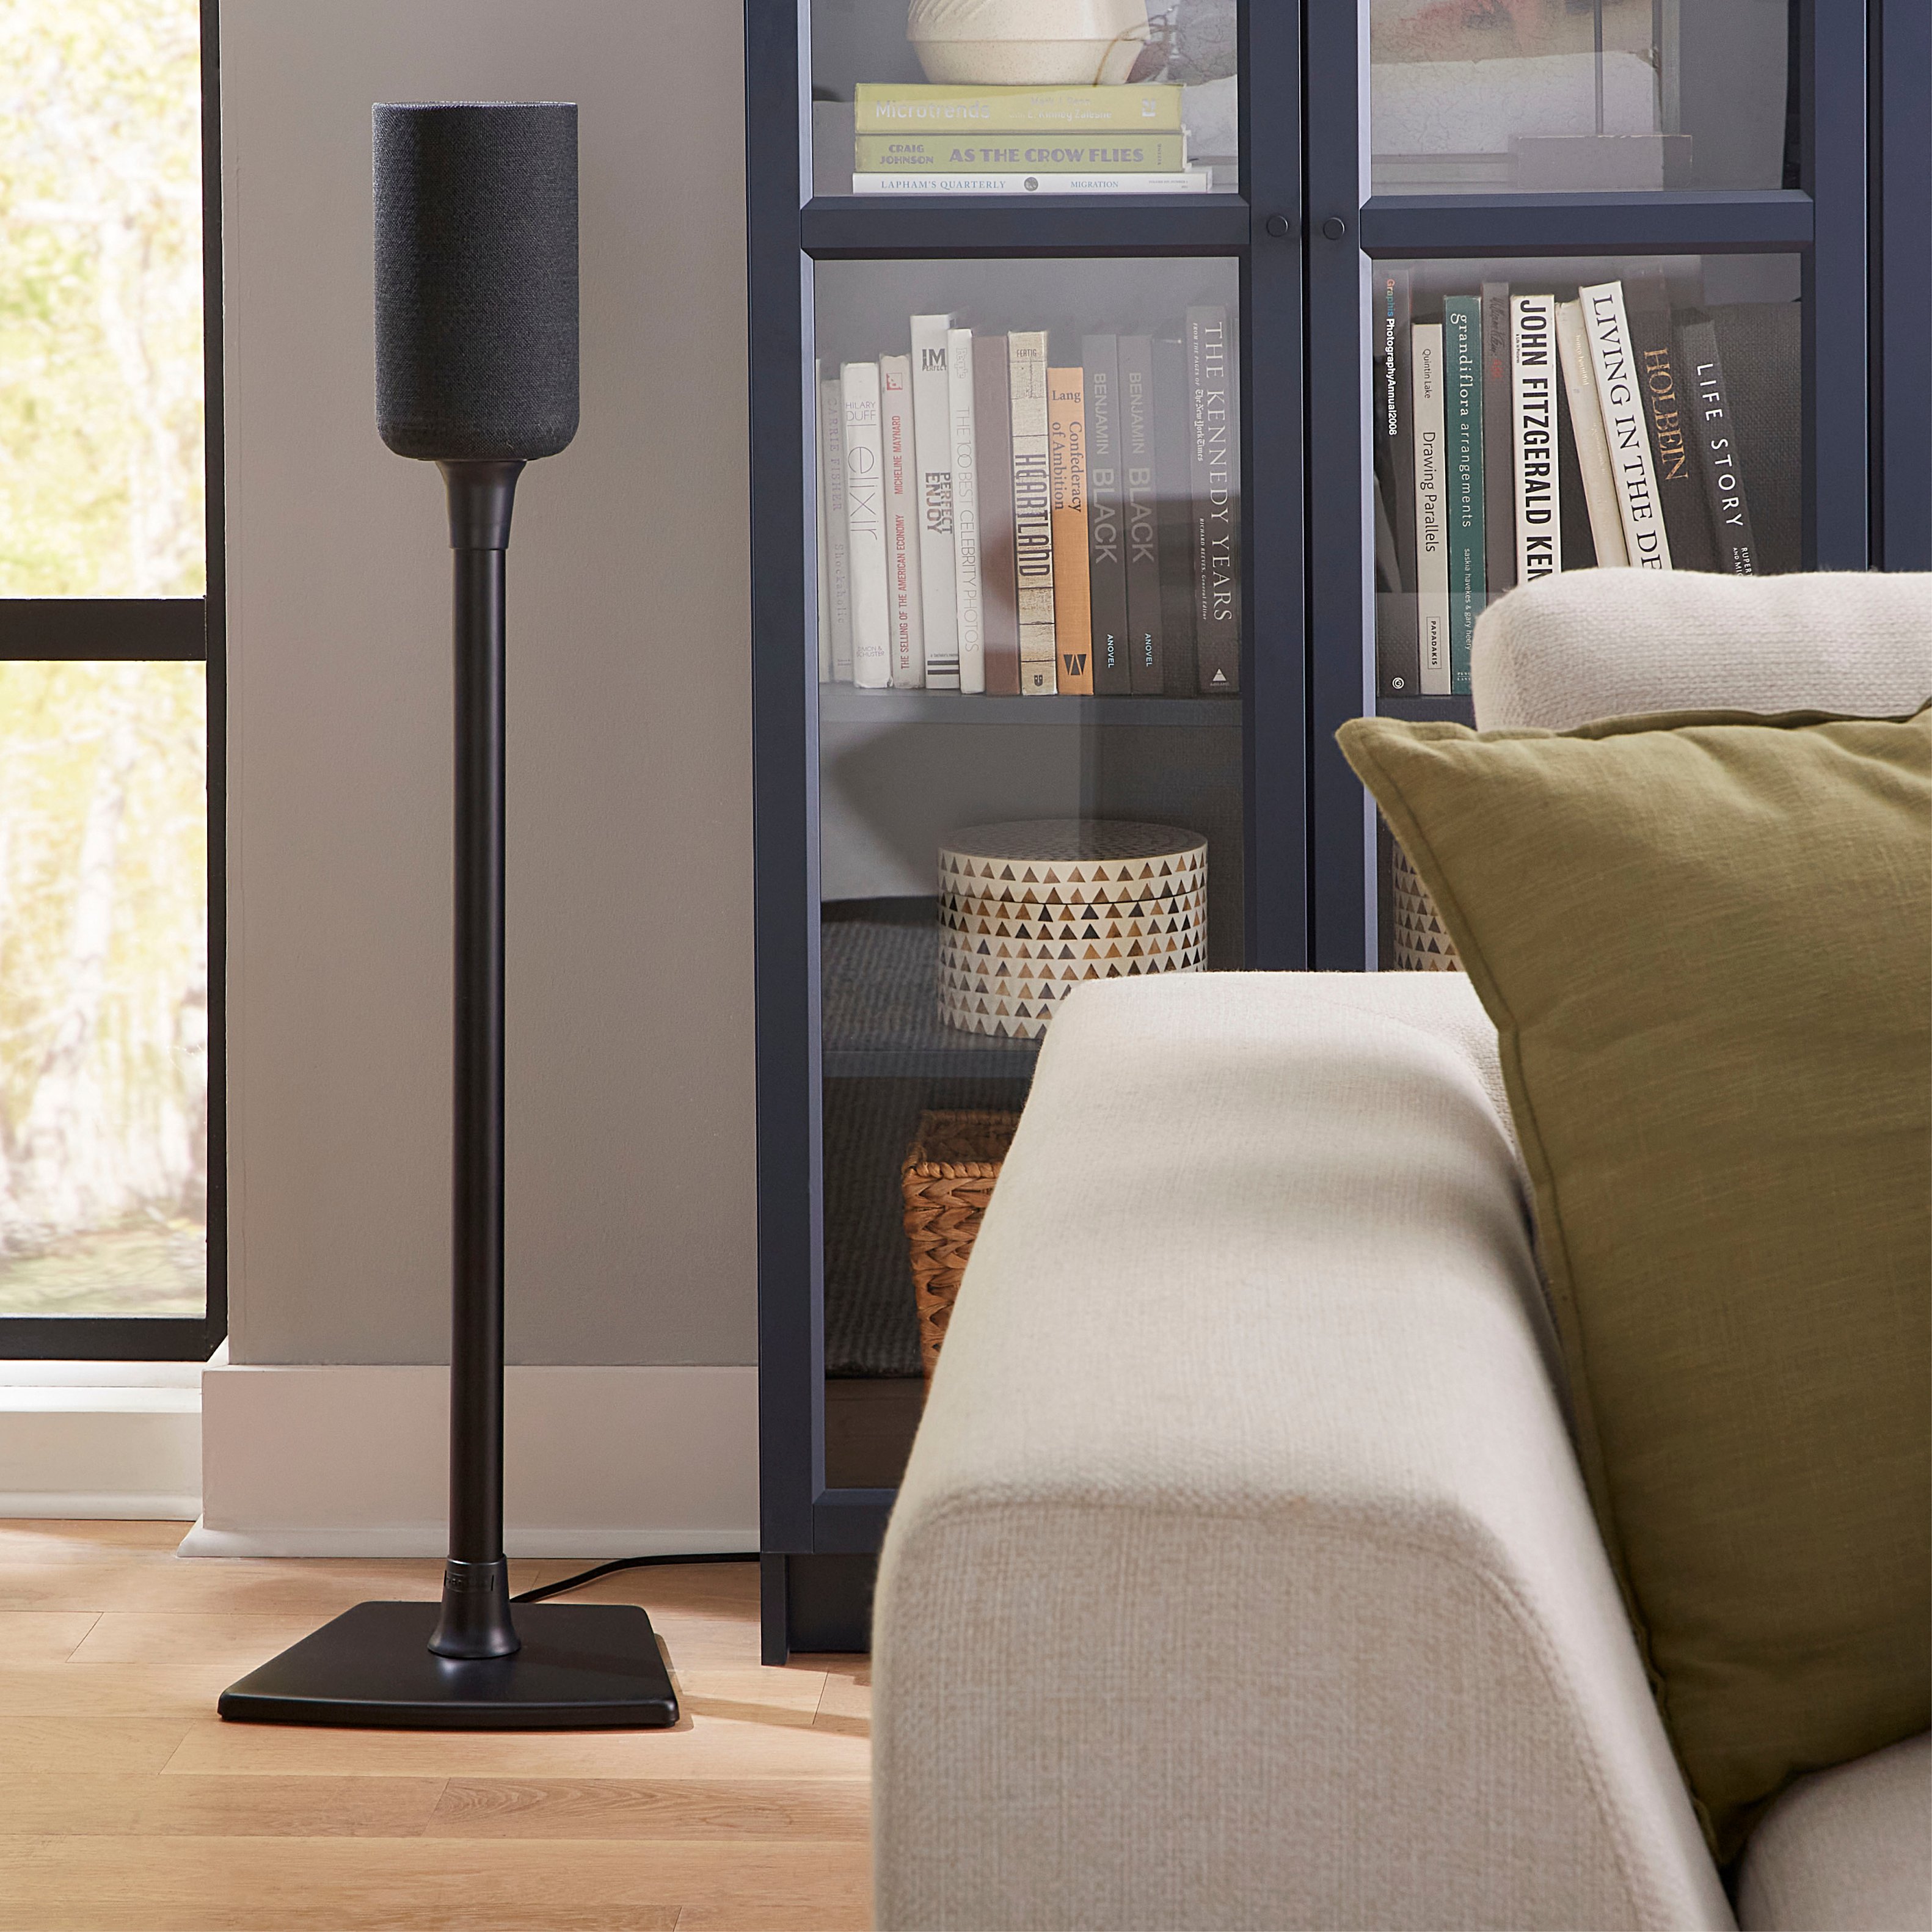 Back View: Sanus - 30" to 42" Adjustable Height Speaker Stand for Sonos One, Sonos One SL, PLAY:1 and PLAY:3 Speakers - White